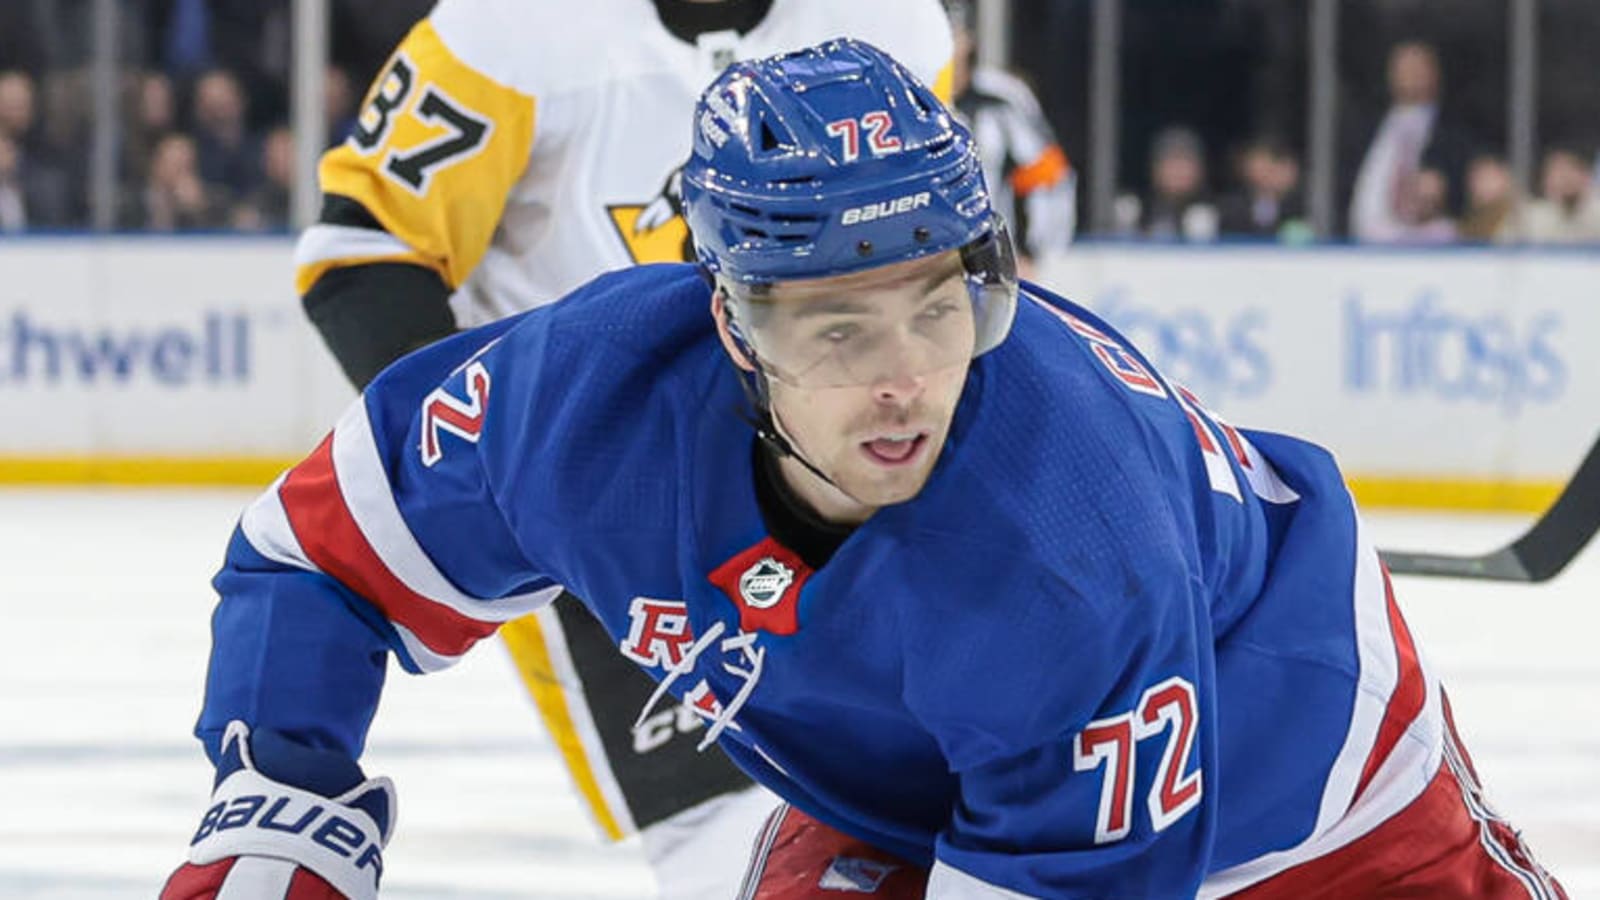 Chytil signs four-year extension with the Rangers